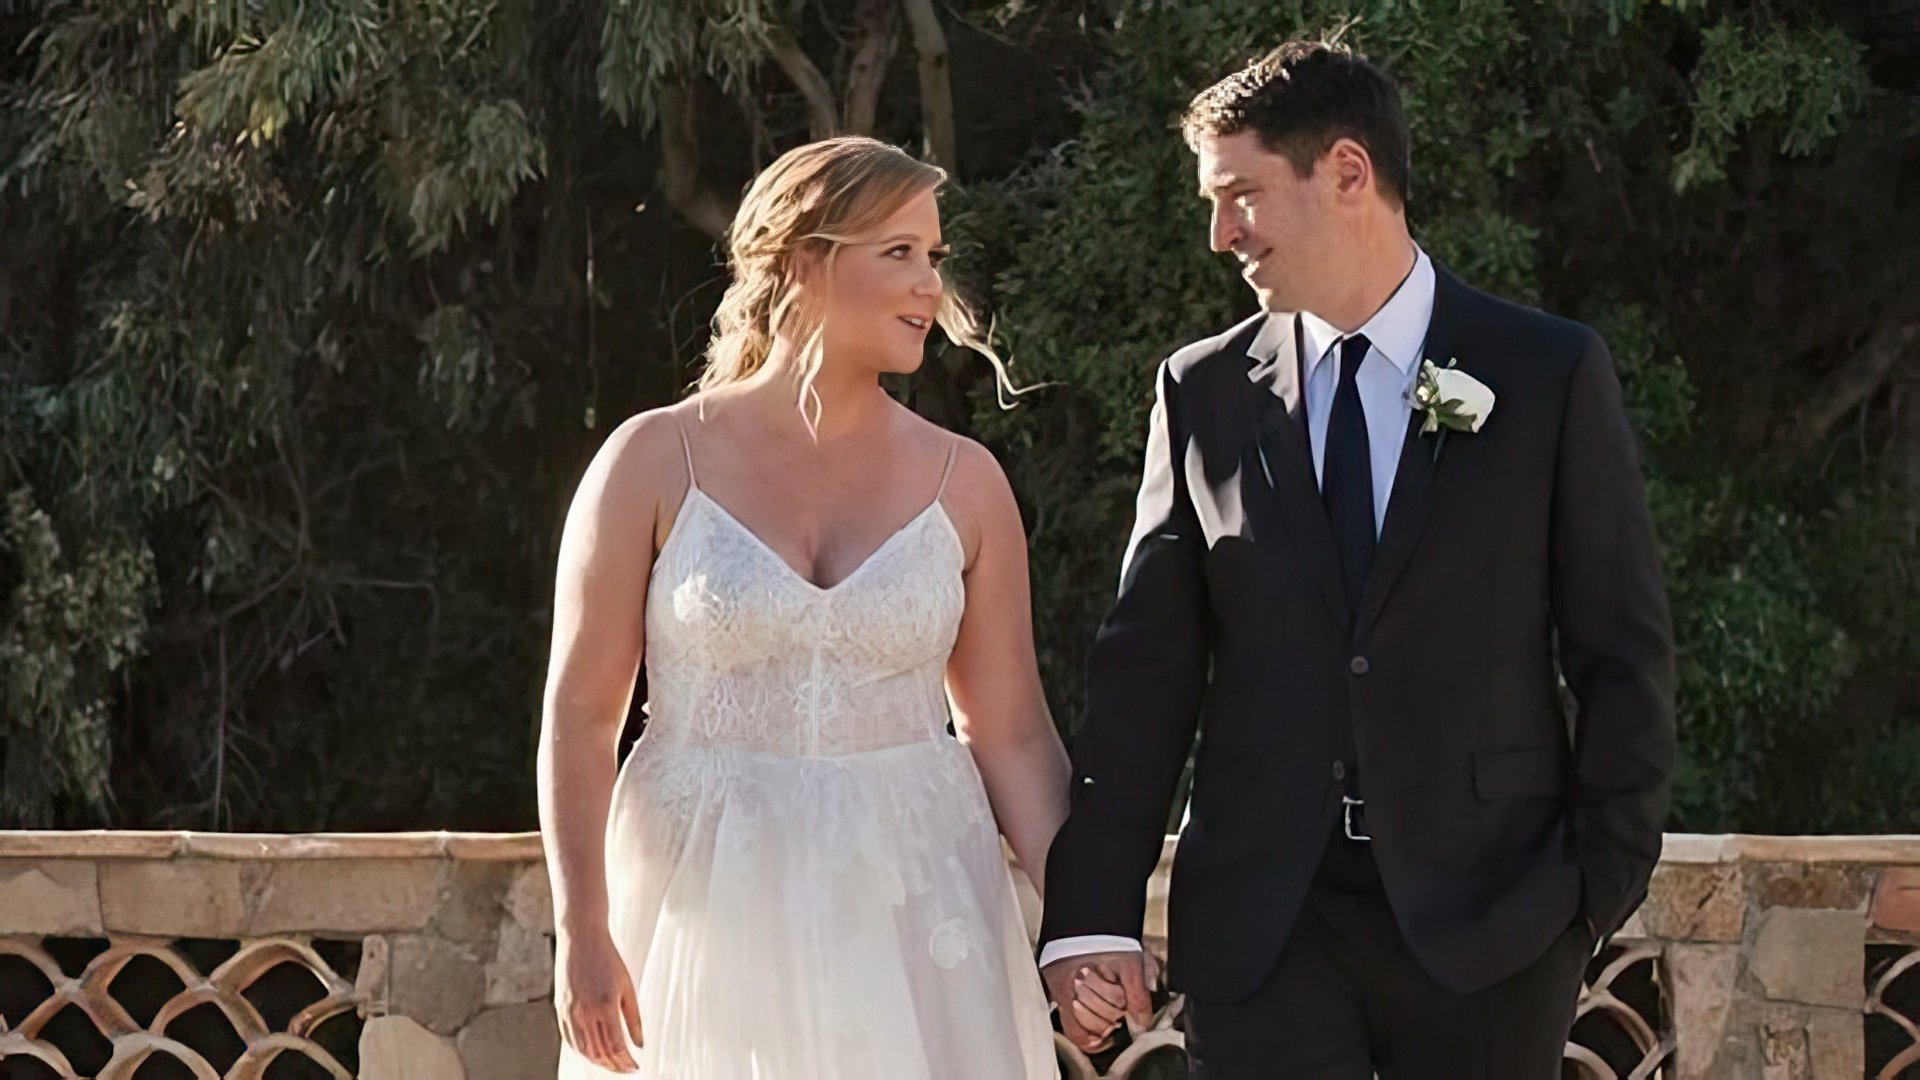 The wedding of Amy Schumer and Chris Fischer